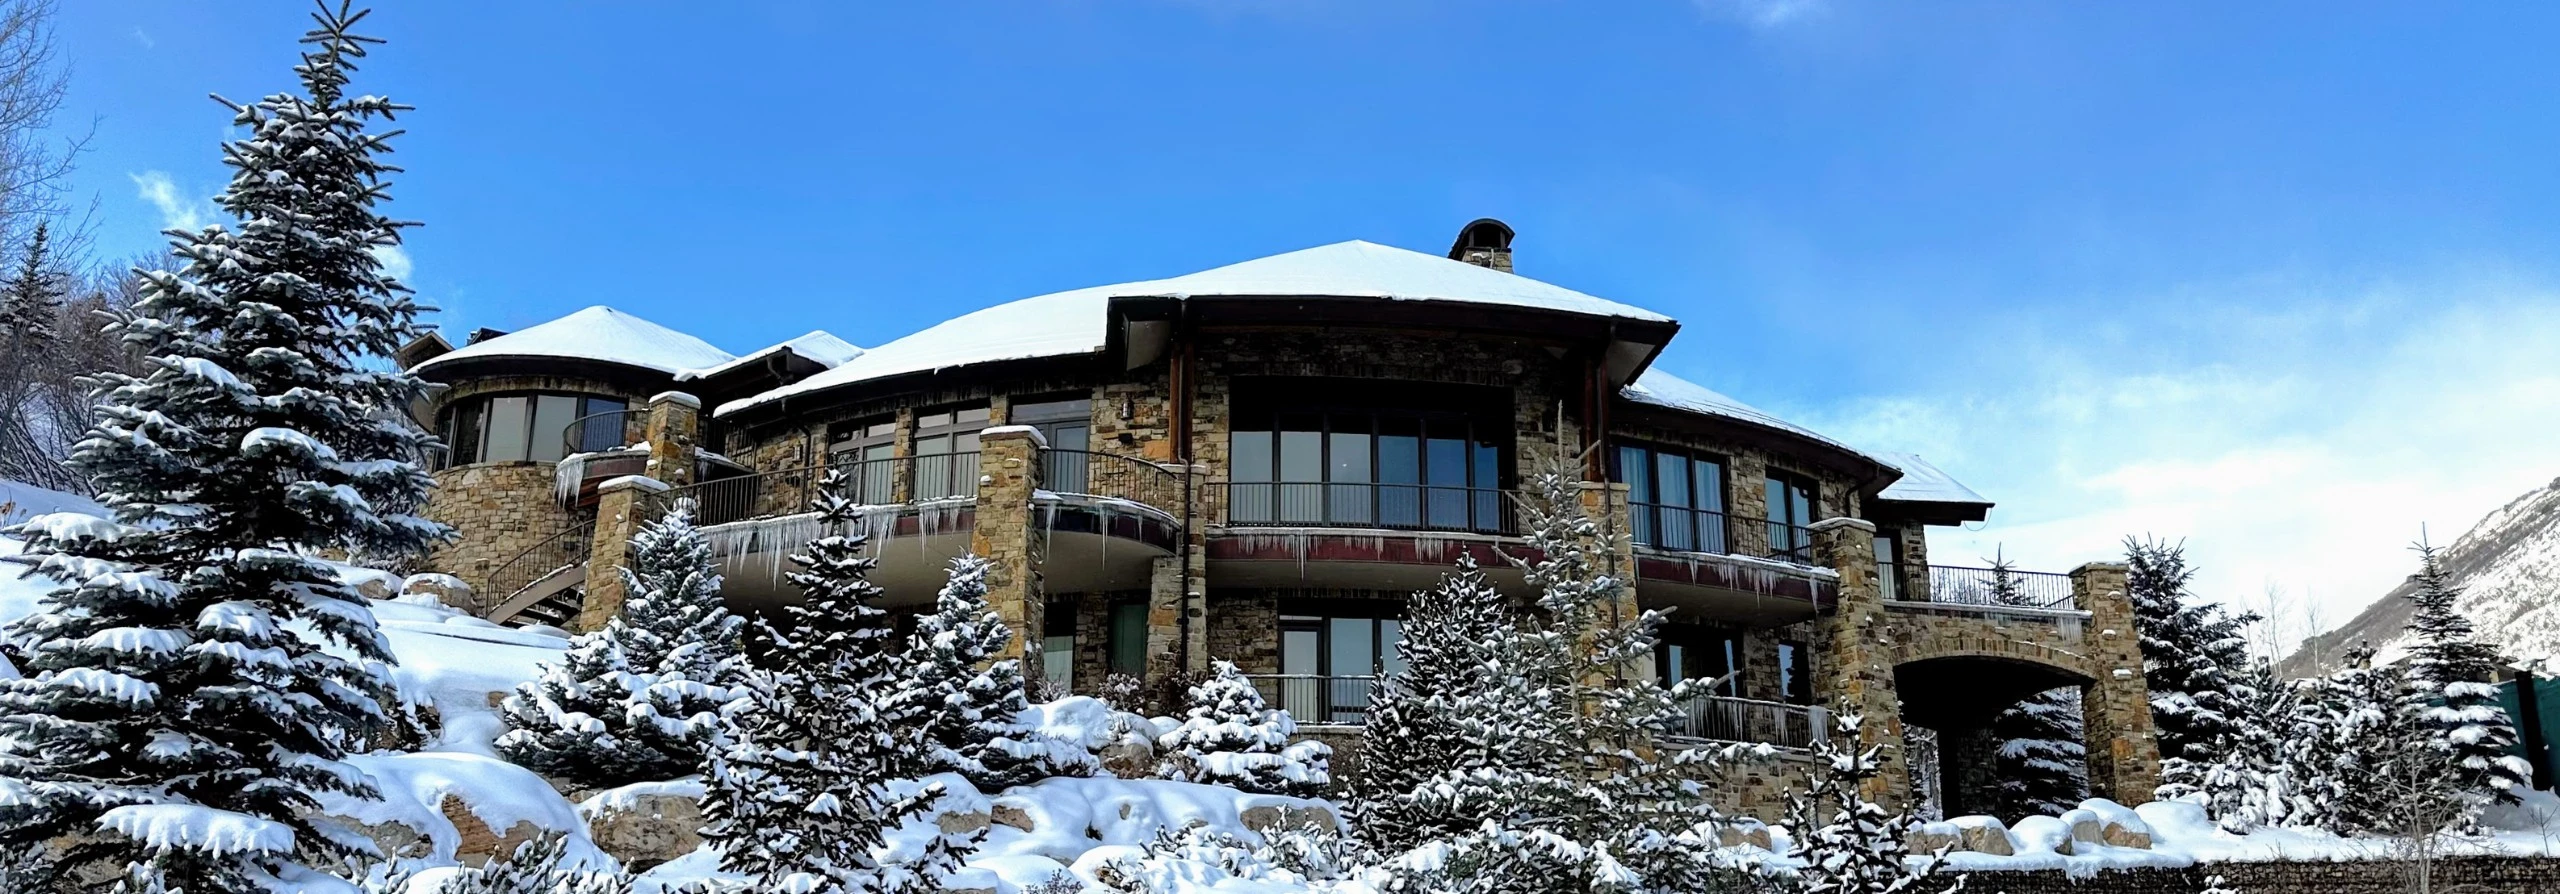 Deer Crest is a area within the Deer Valley Resort Area with Homes for Sale